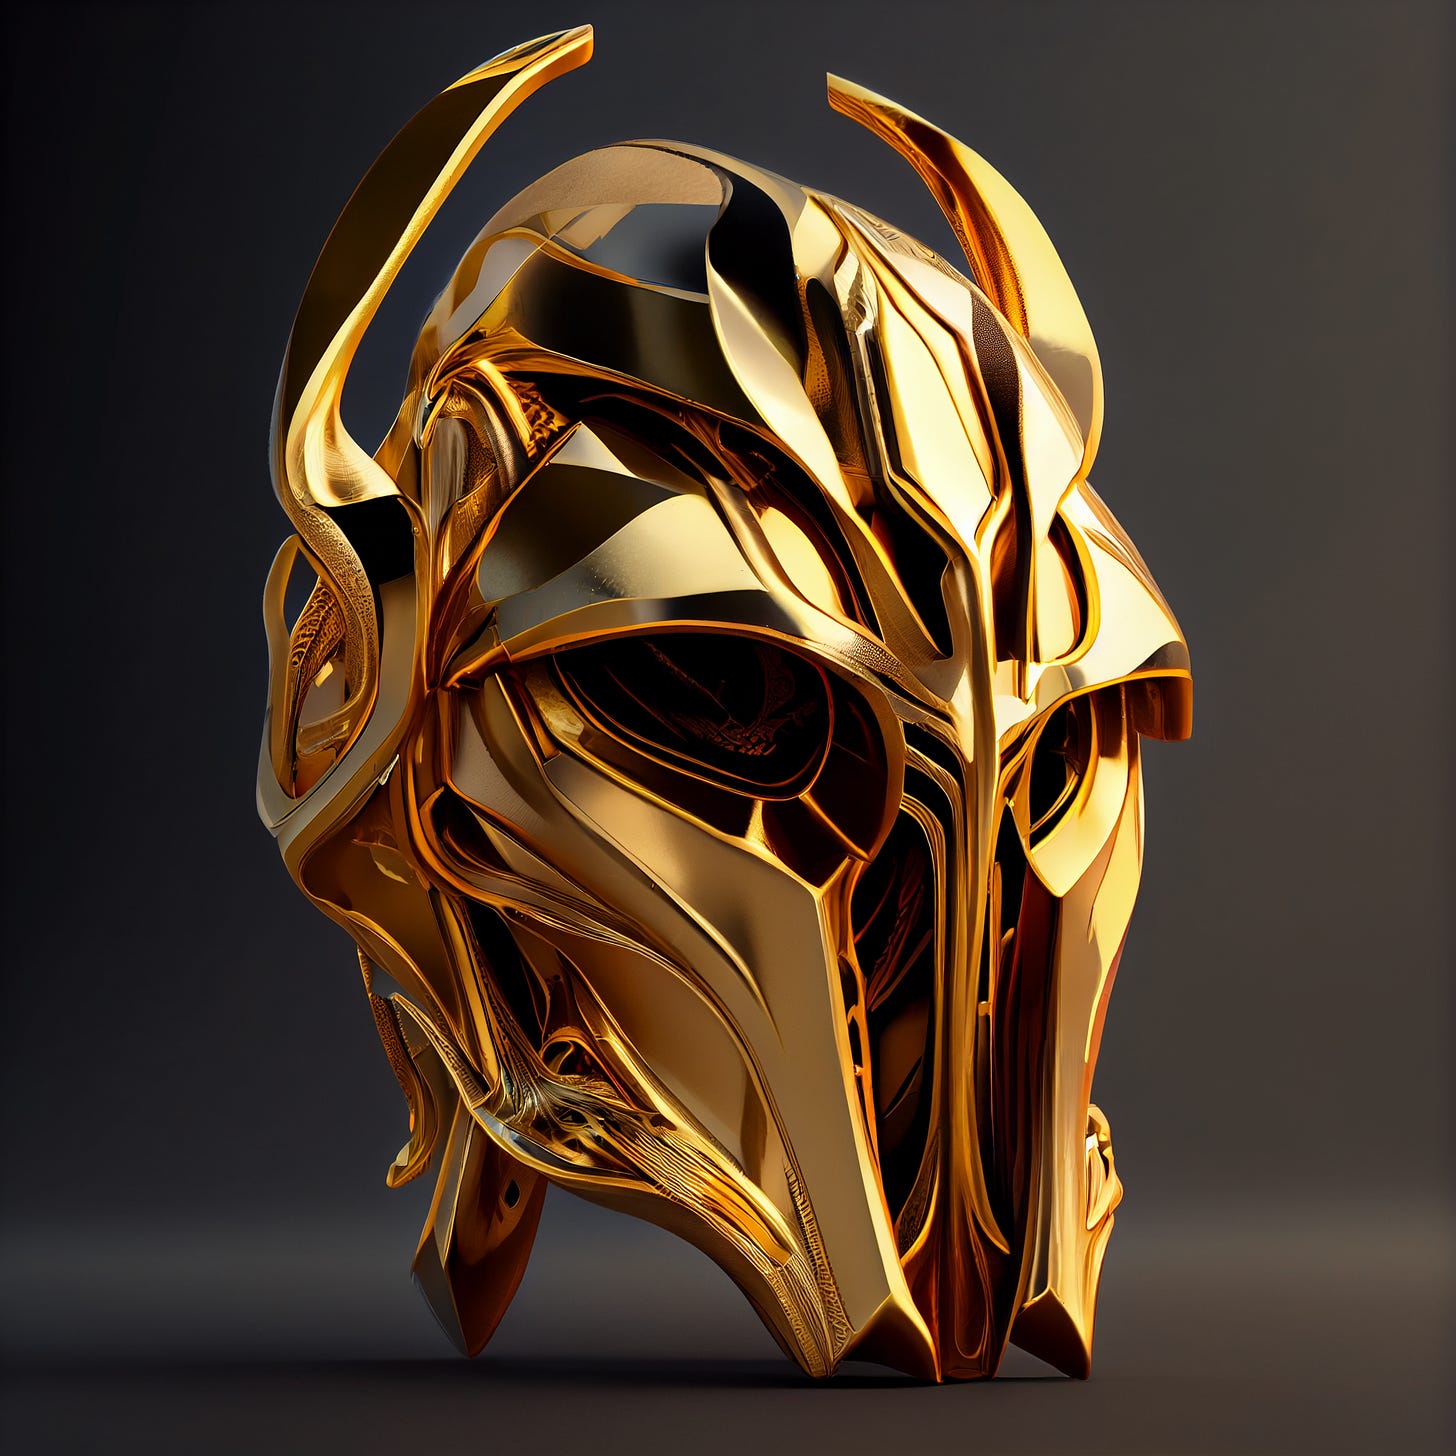 General Grievous helmet made of solid gold, dripping with melting gold, intricate, elegant, photorealistic, studio lighting, dark background, 8k